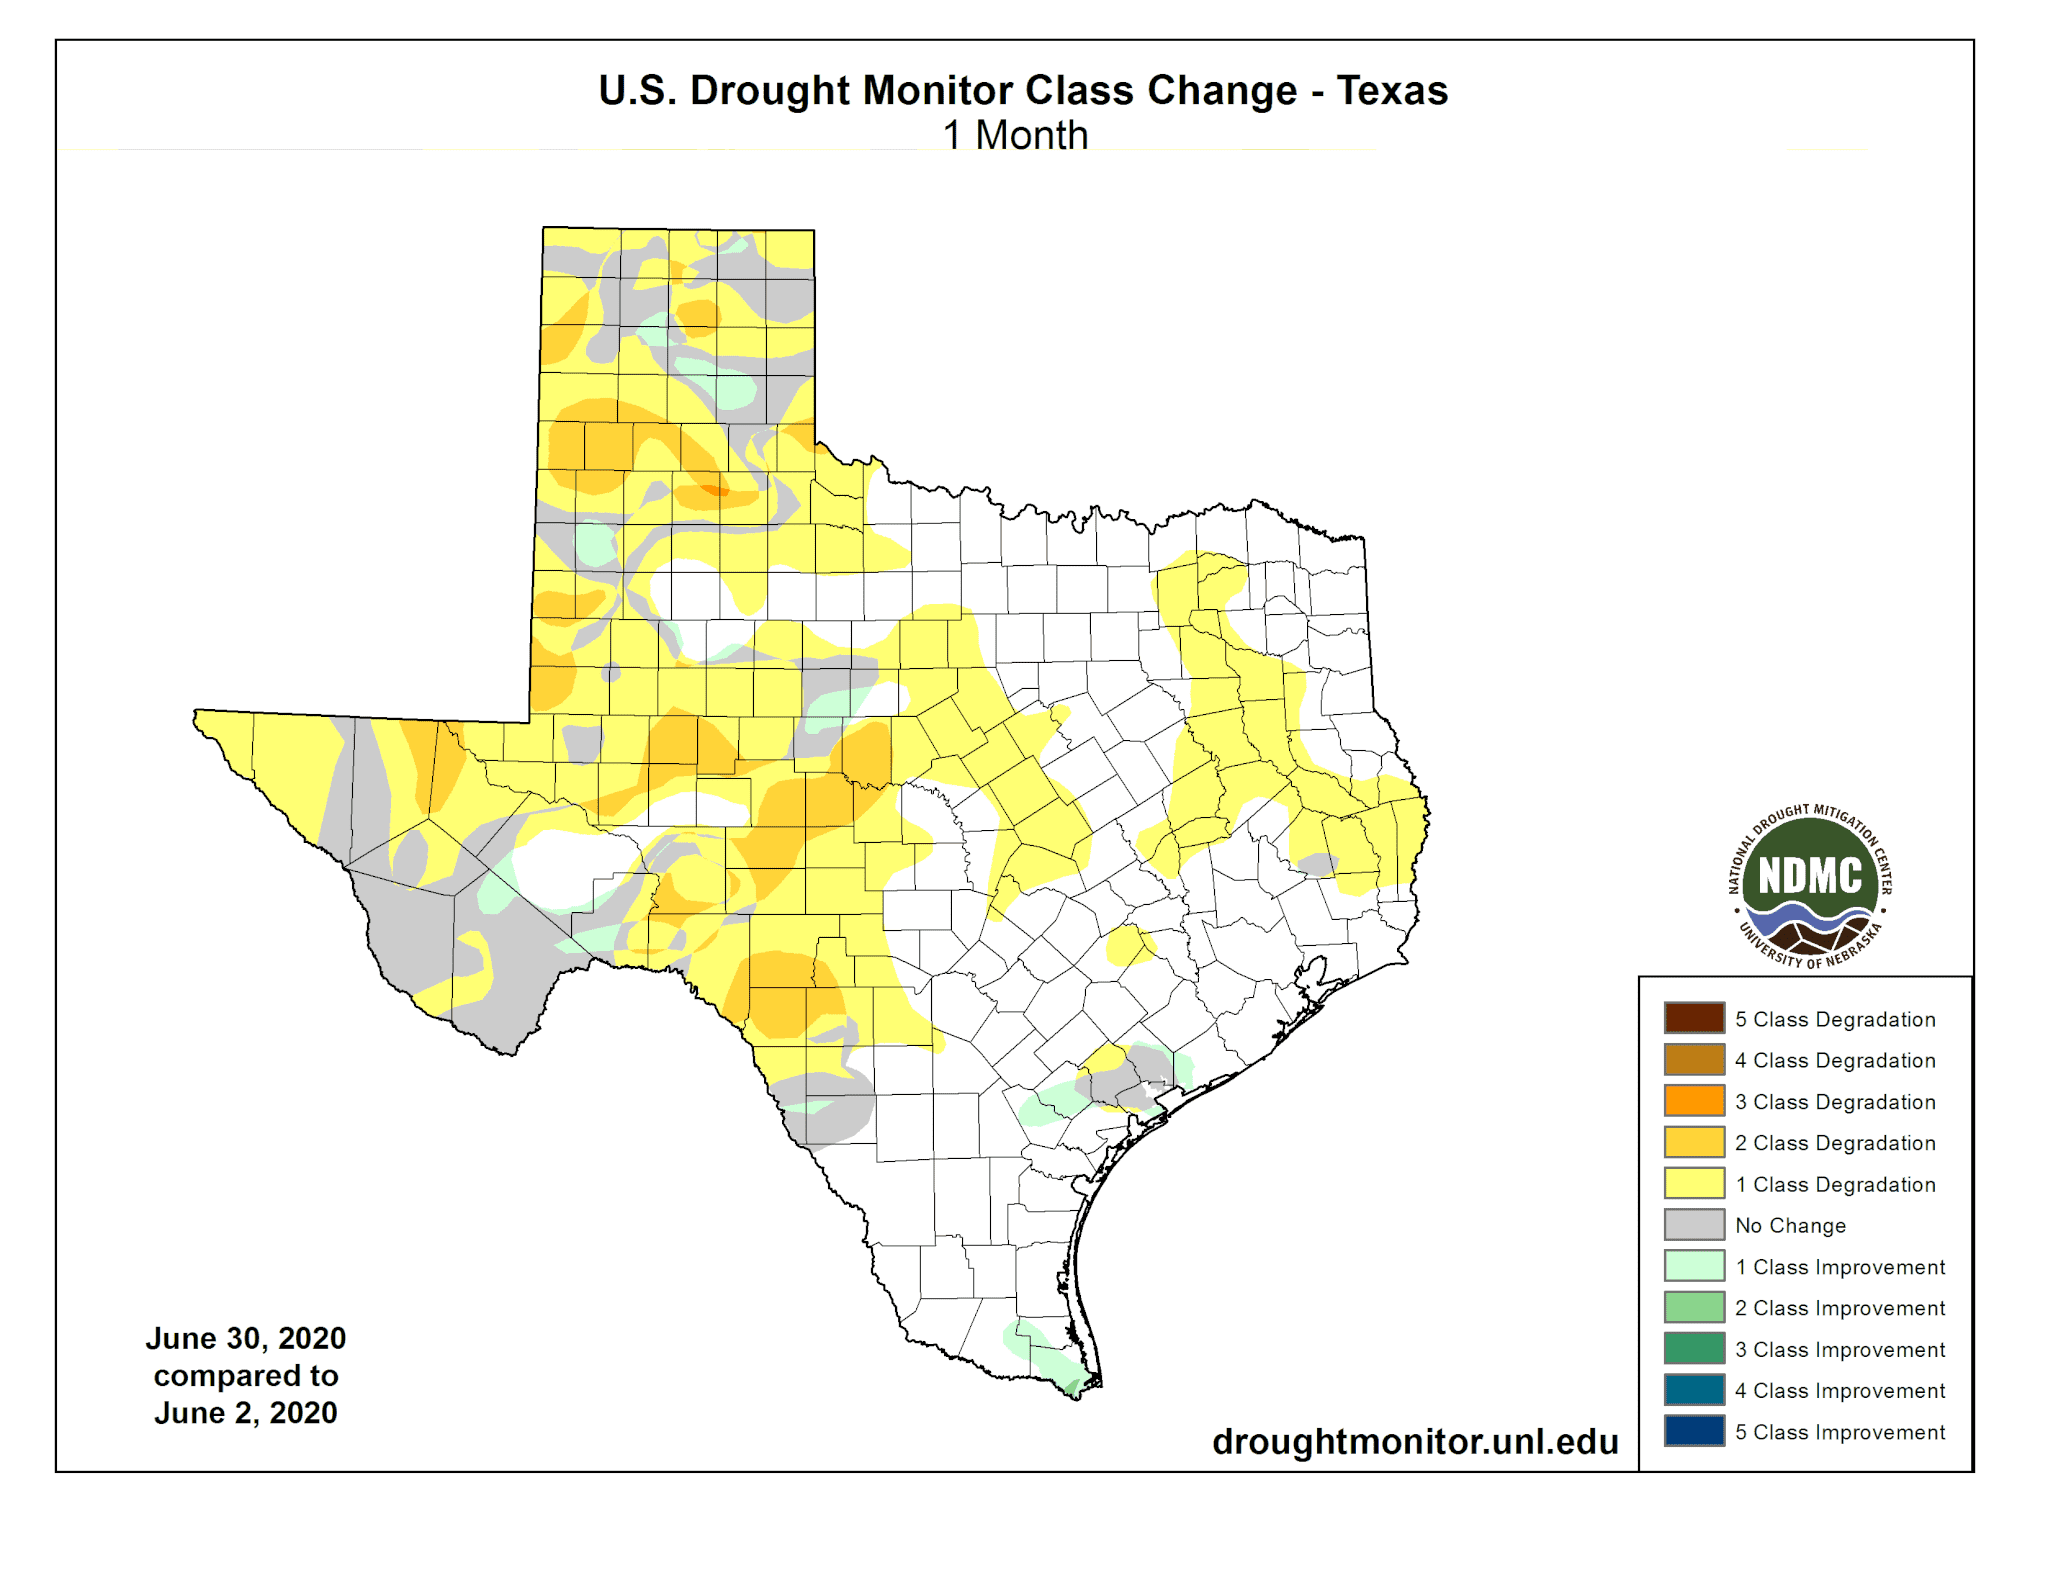 Drought is making a comeback in Texas